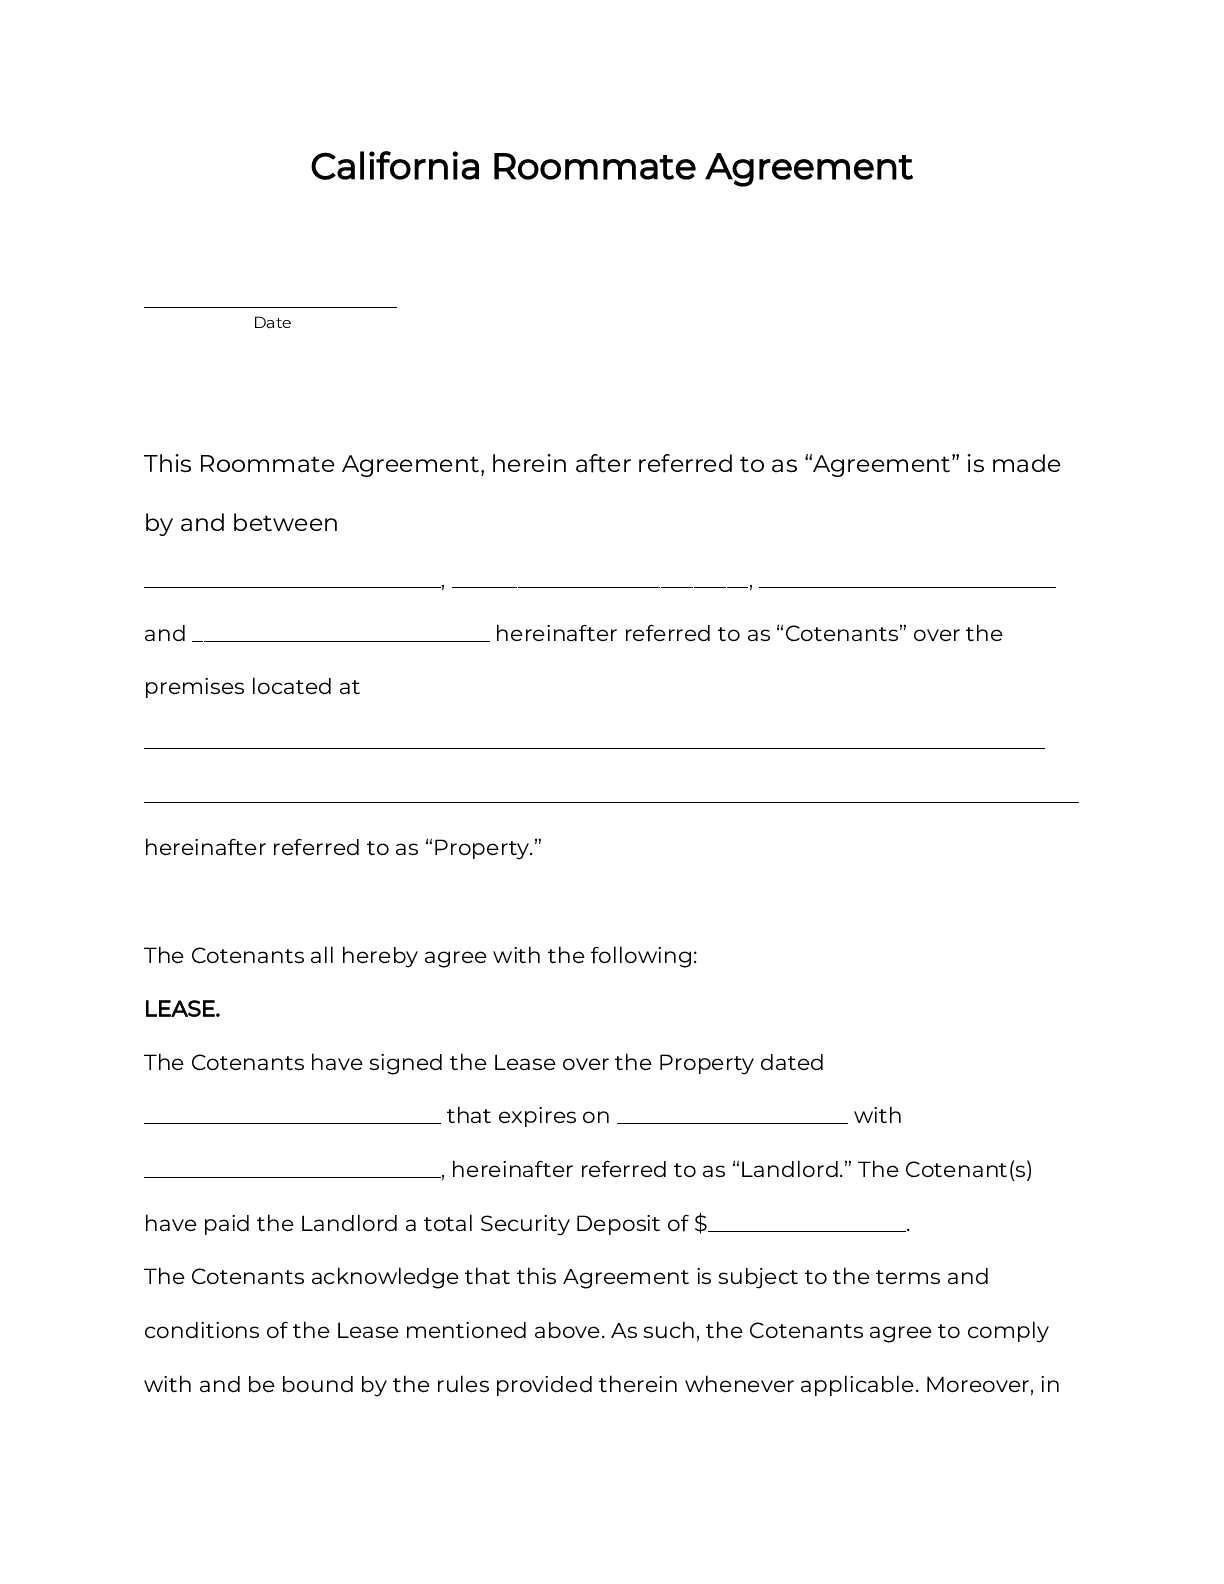 OFFICIAL California Room Rental Agreement: Roommate Form [23]  PDF Pertaining To landlord lodger agreement template